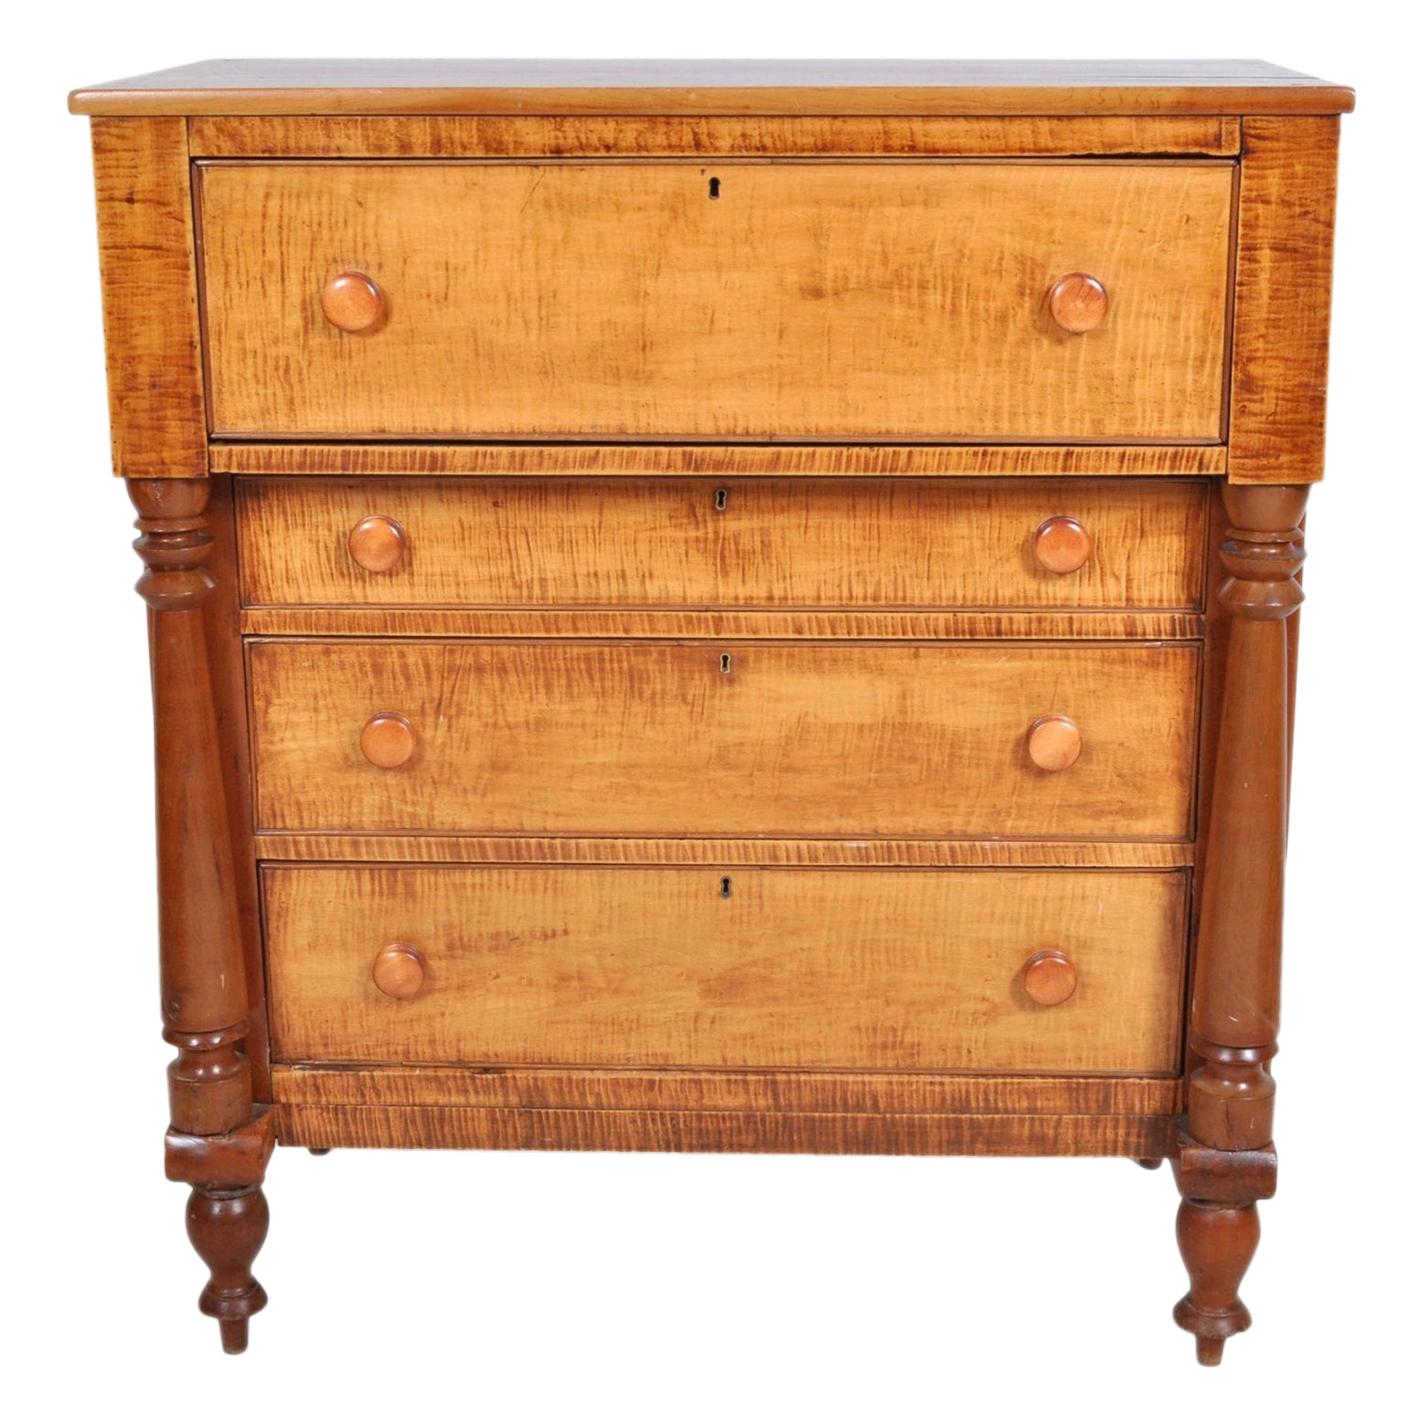 Antique Pennsylvanian 'Tiger Maple' Chest of Drawers, circa 1840